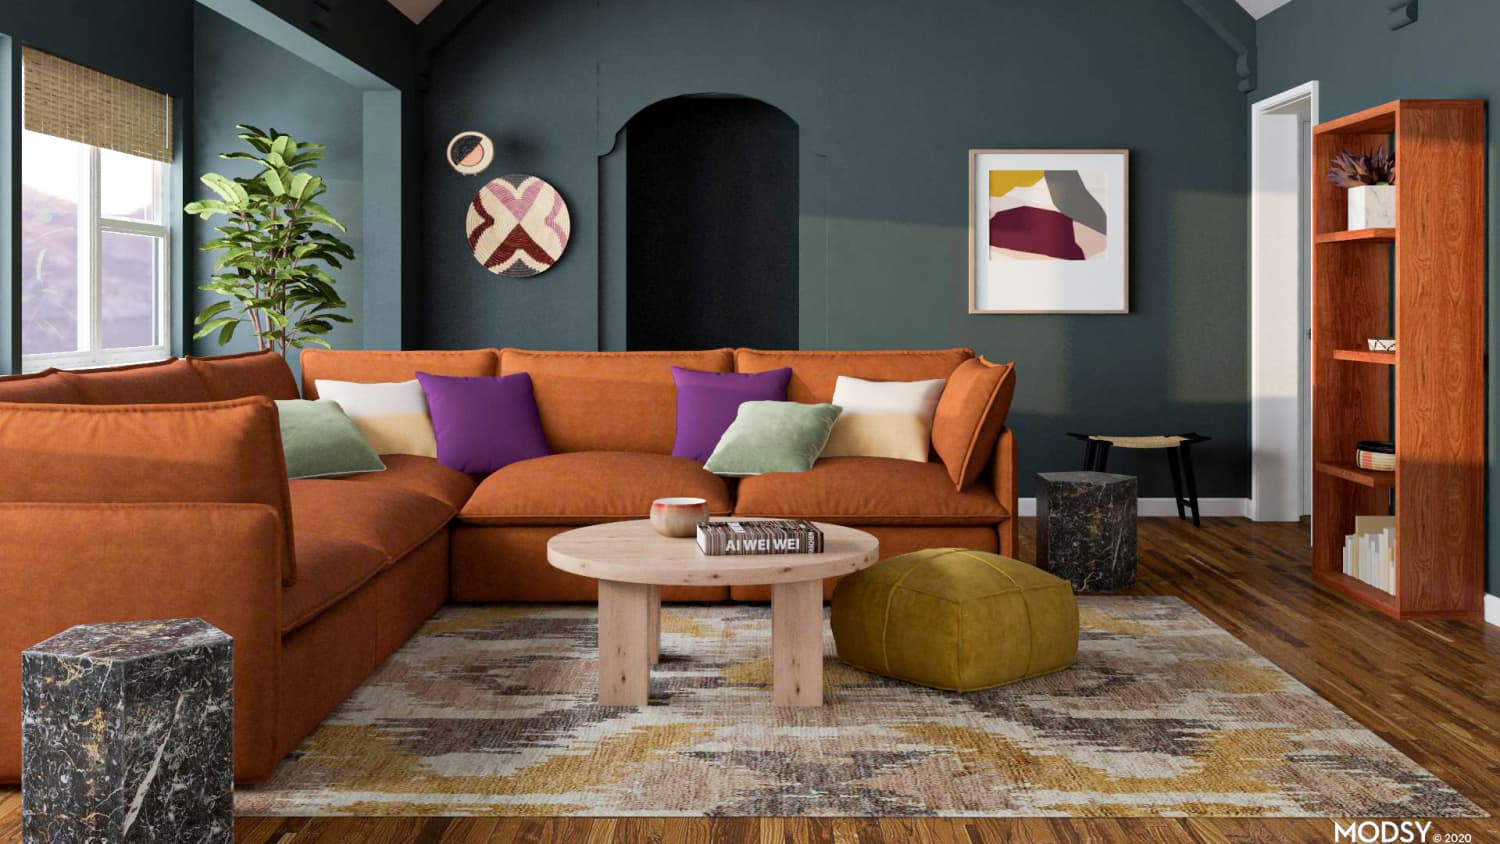 These Are the 6 Biggest Design Trends for 2021, According to One Survey | Apartment  Therapy